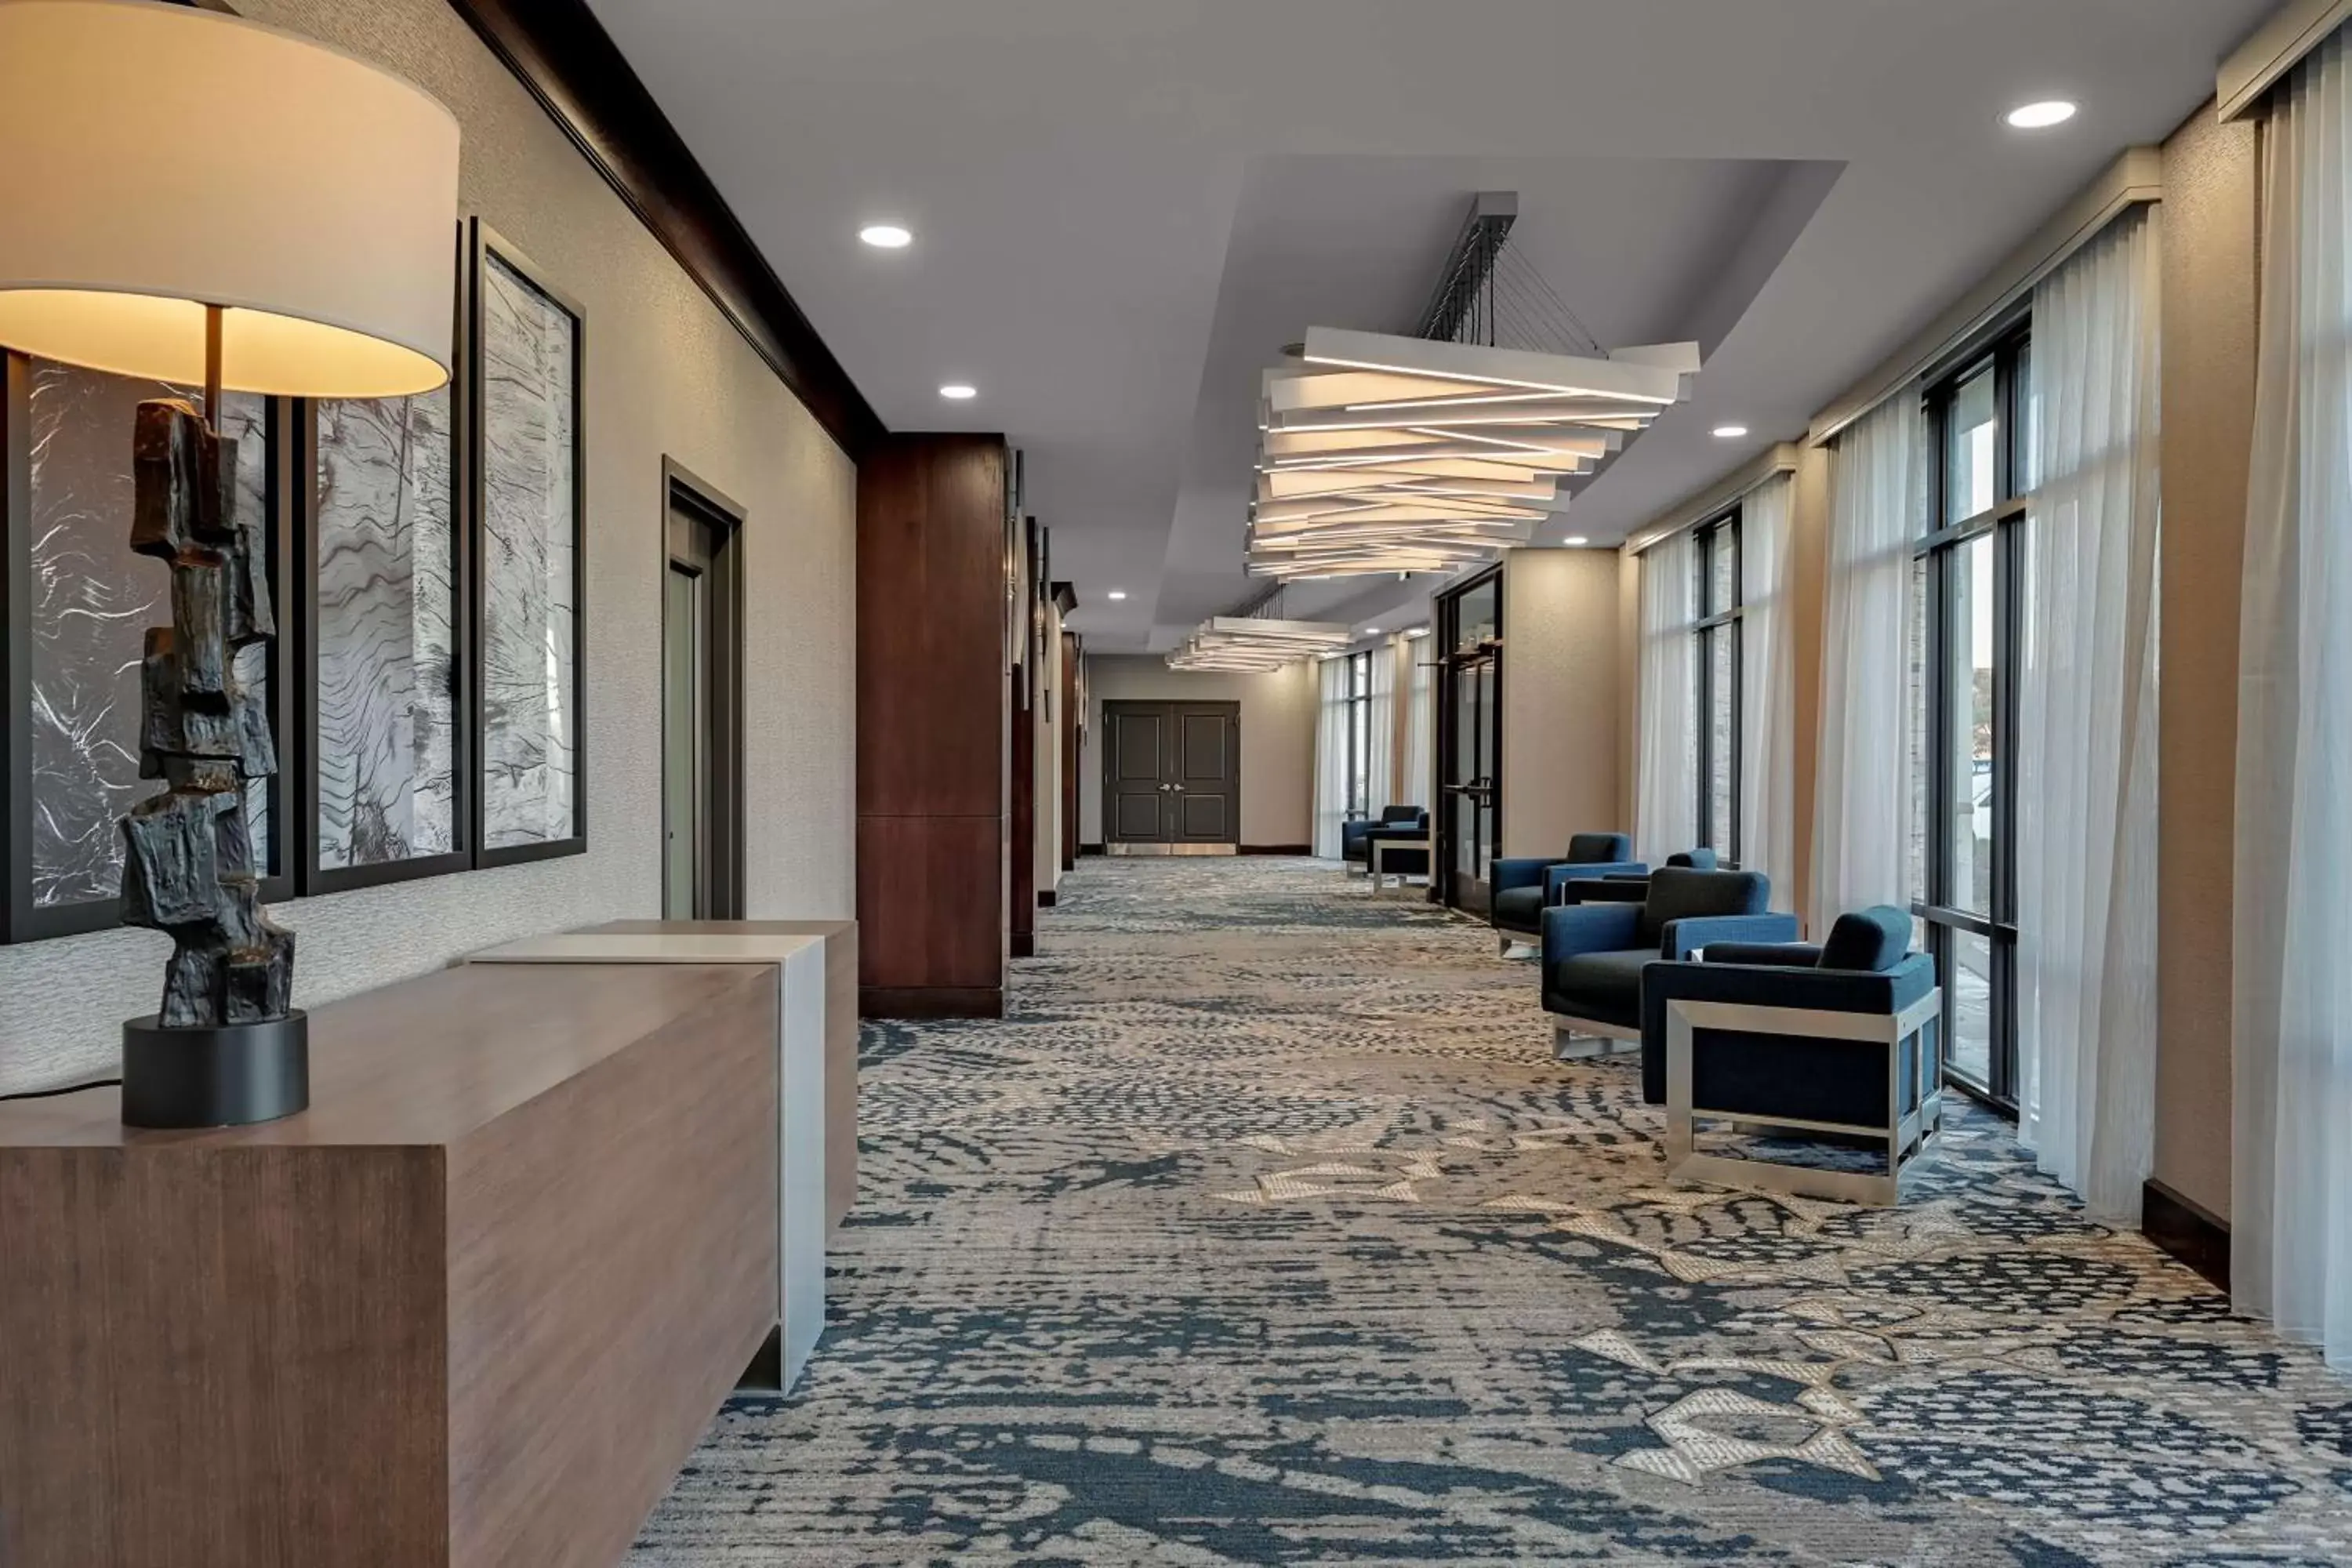 Meeting/conference room, Lobby/Reception in DoubleTree by Hilton Denver International Airport, CO